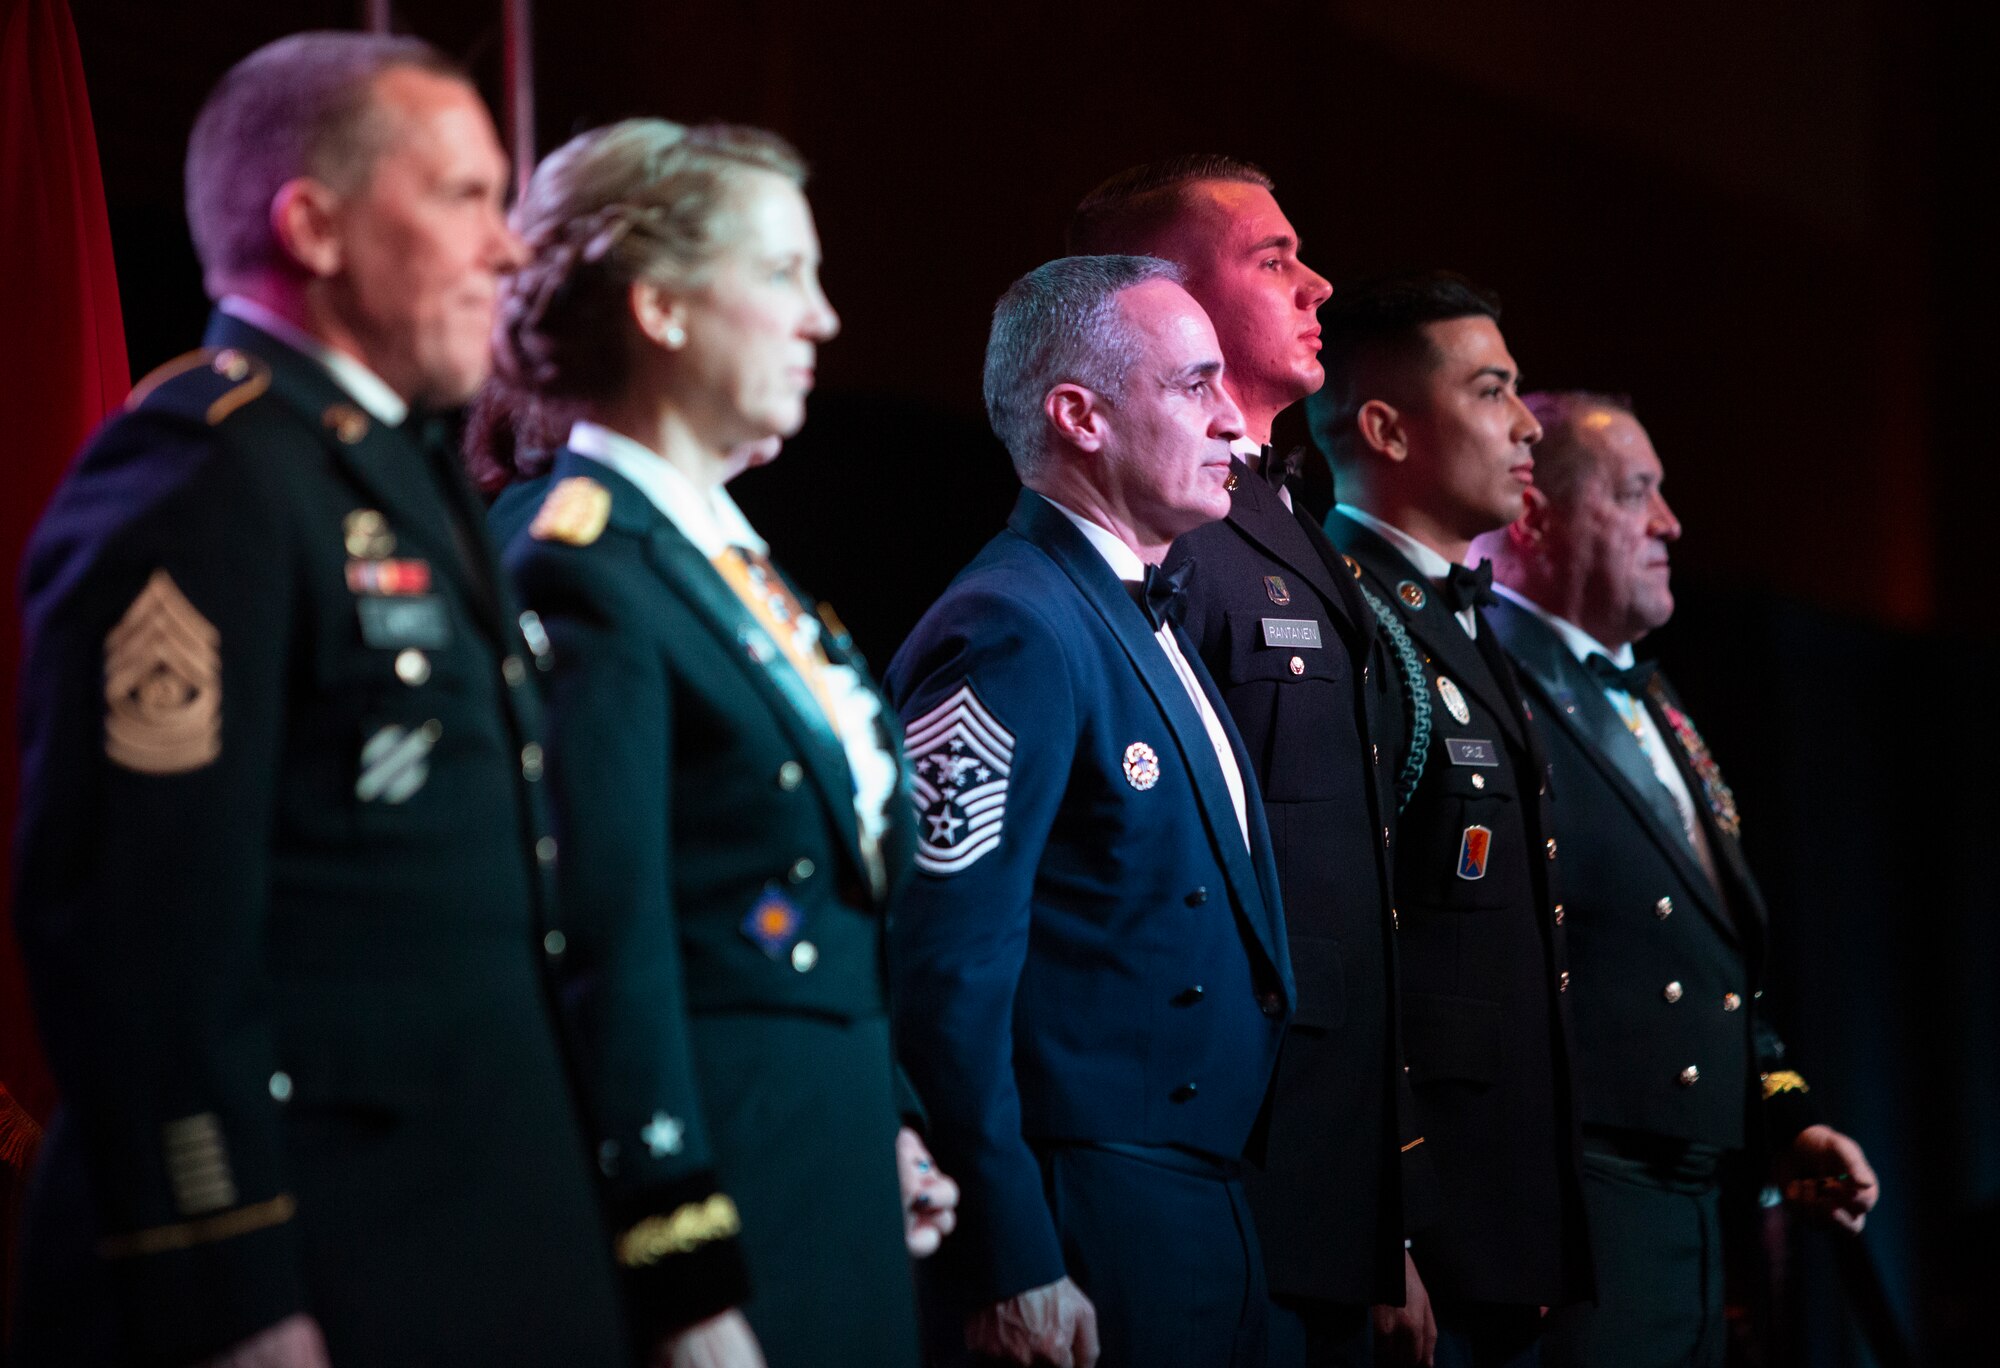 Senior Enlisted Advisor to the Chairman of the Joint Chiefs of Staff Ramón “CZ” Colón-López, center, stands at attention as medal citations are read for U.S. Army Sgt. Alec Rantanen, third from right, and Spc. Jesus Cruz, second from right, during the California Military Department Service Member of the Year Banquet, Jan. 18, 2020, in San Diego. The banquet recognized the best enlisted soldiers, airmen and sailors in the California Army National Guard, California Air National Guard and California State Guard. Rantanen earned Noncommissioned Officer of the Year honors for the California Army National Guard and Cruz was named Soldier of the Year. At right is Maj. Gen. David S. Baldwin, Adjutant General of the California Military Department.